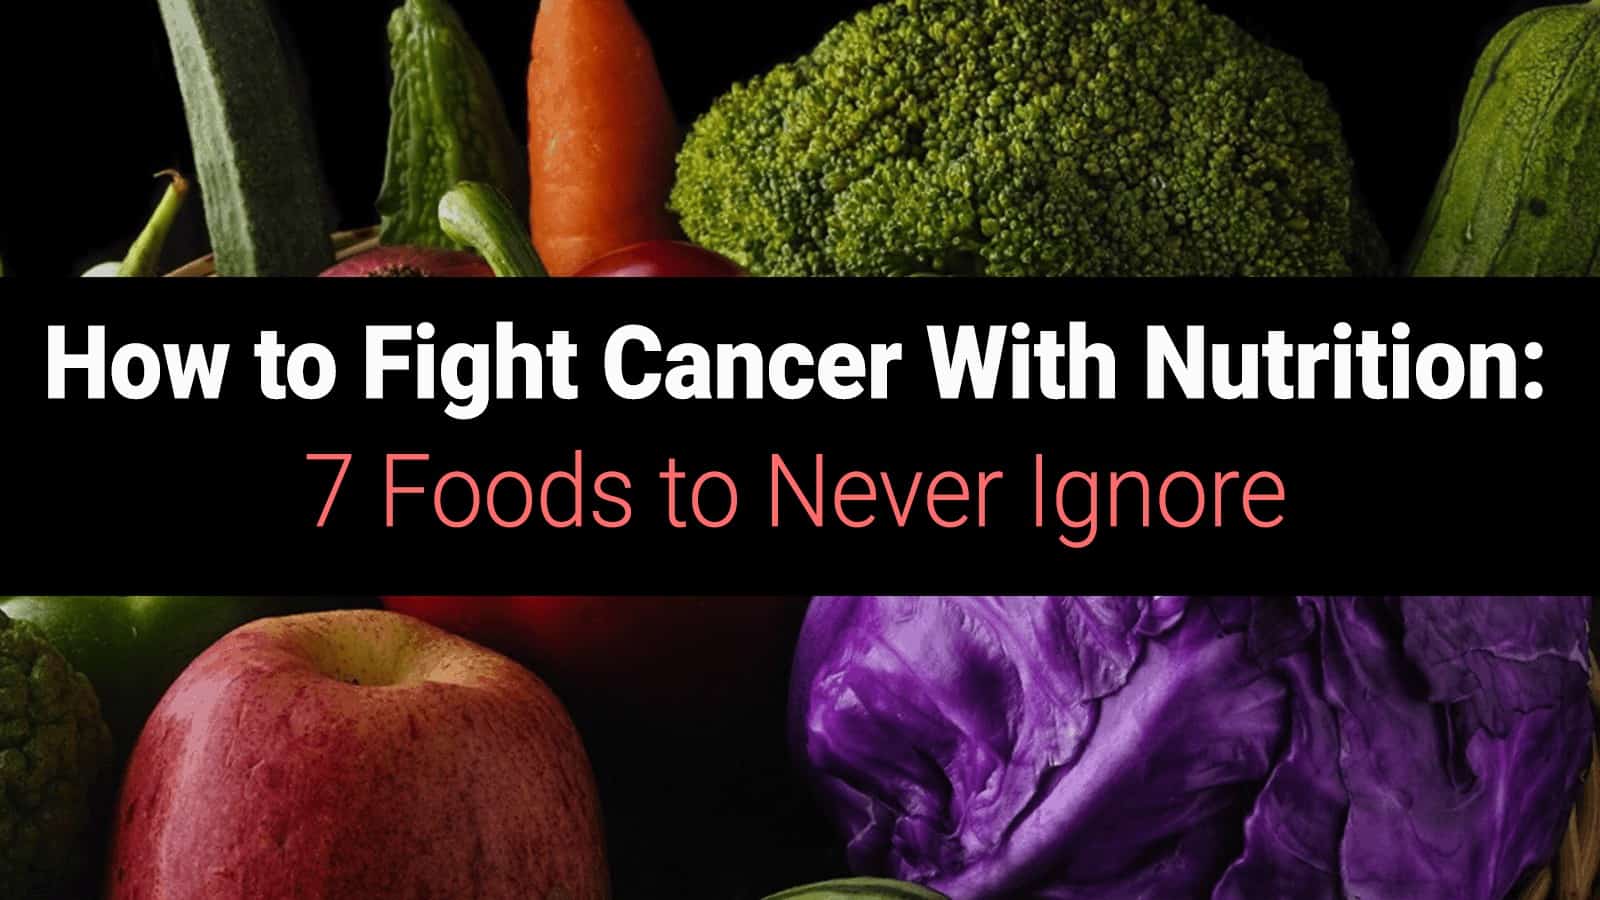 How to Fight Cancer With Nutrition: 7 Foods to Never Ignore